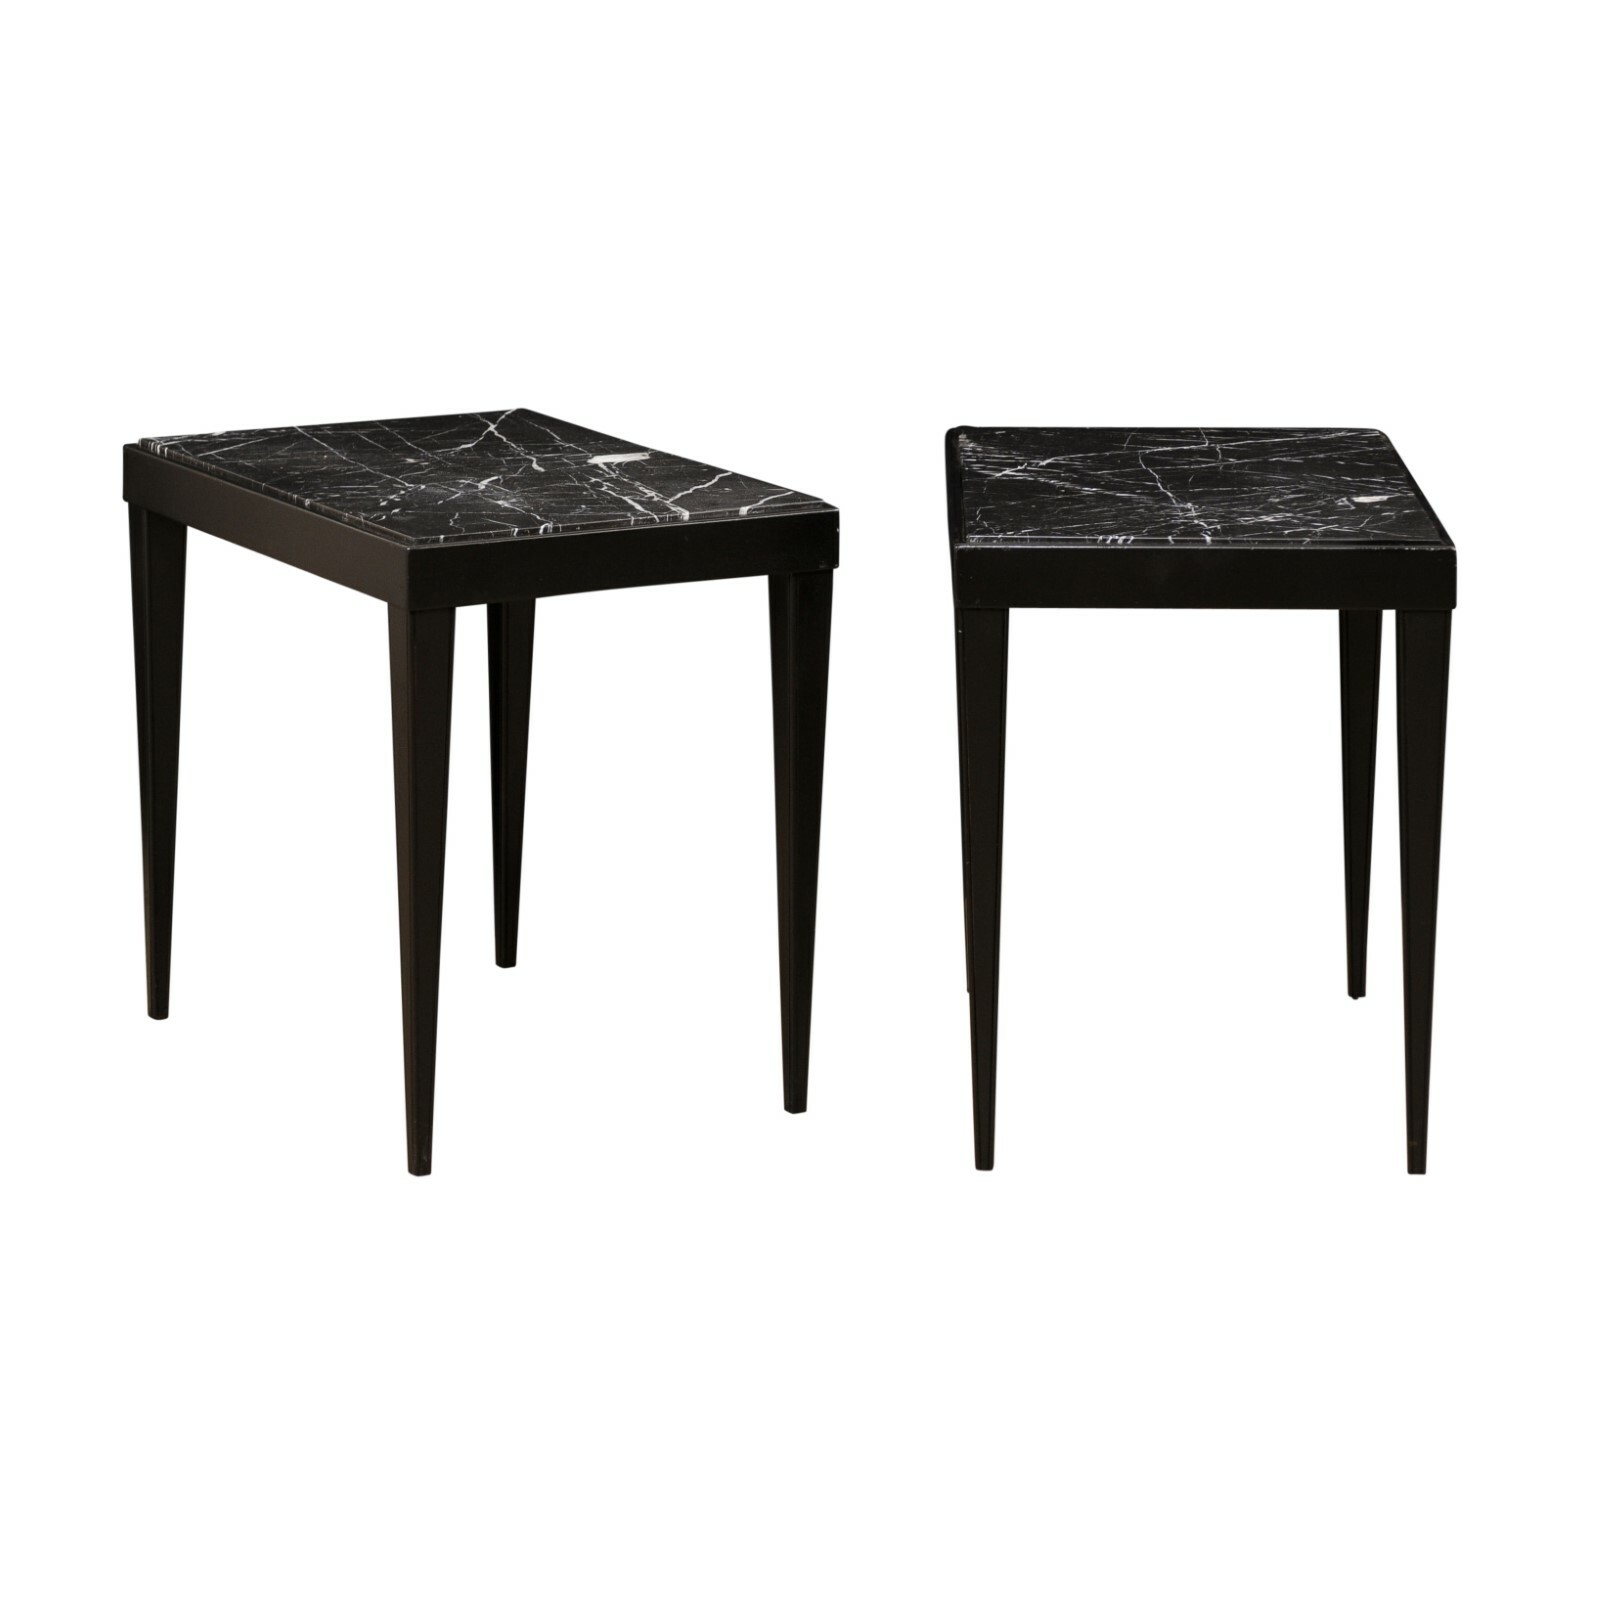 French Sleek Black Marble Top Side Tables